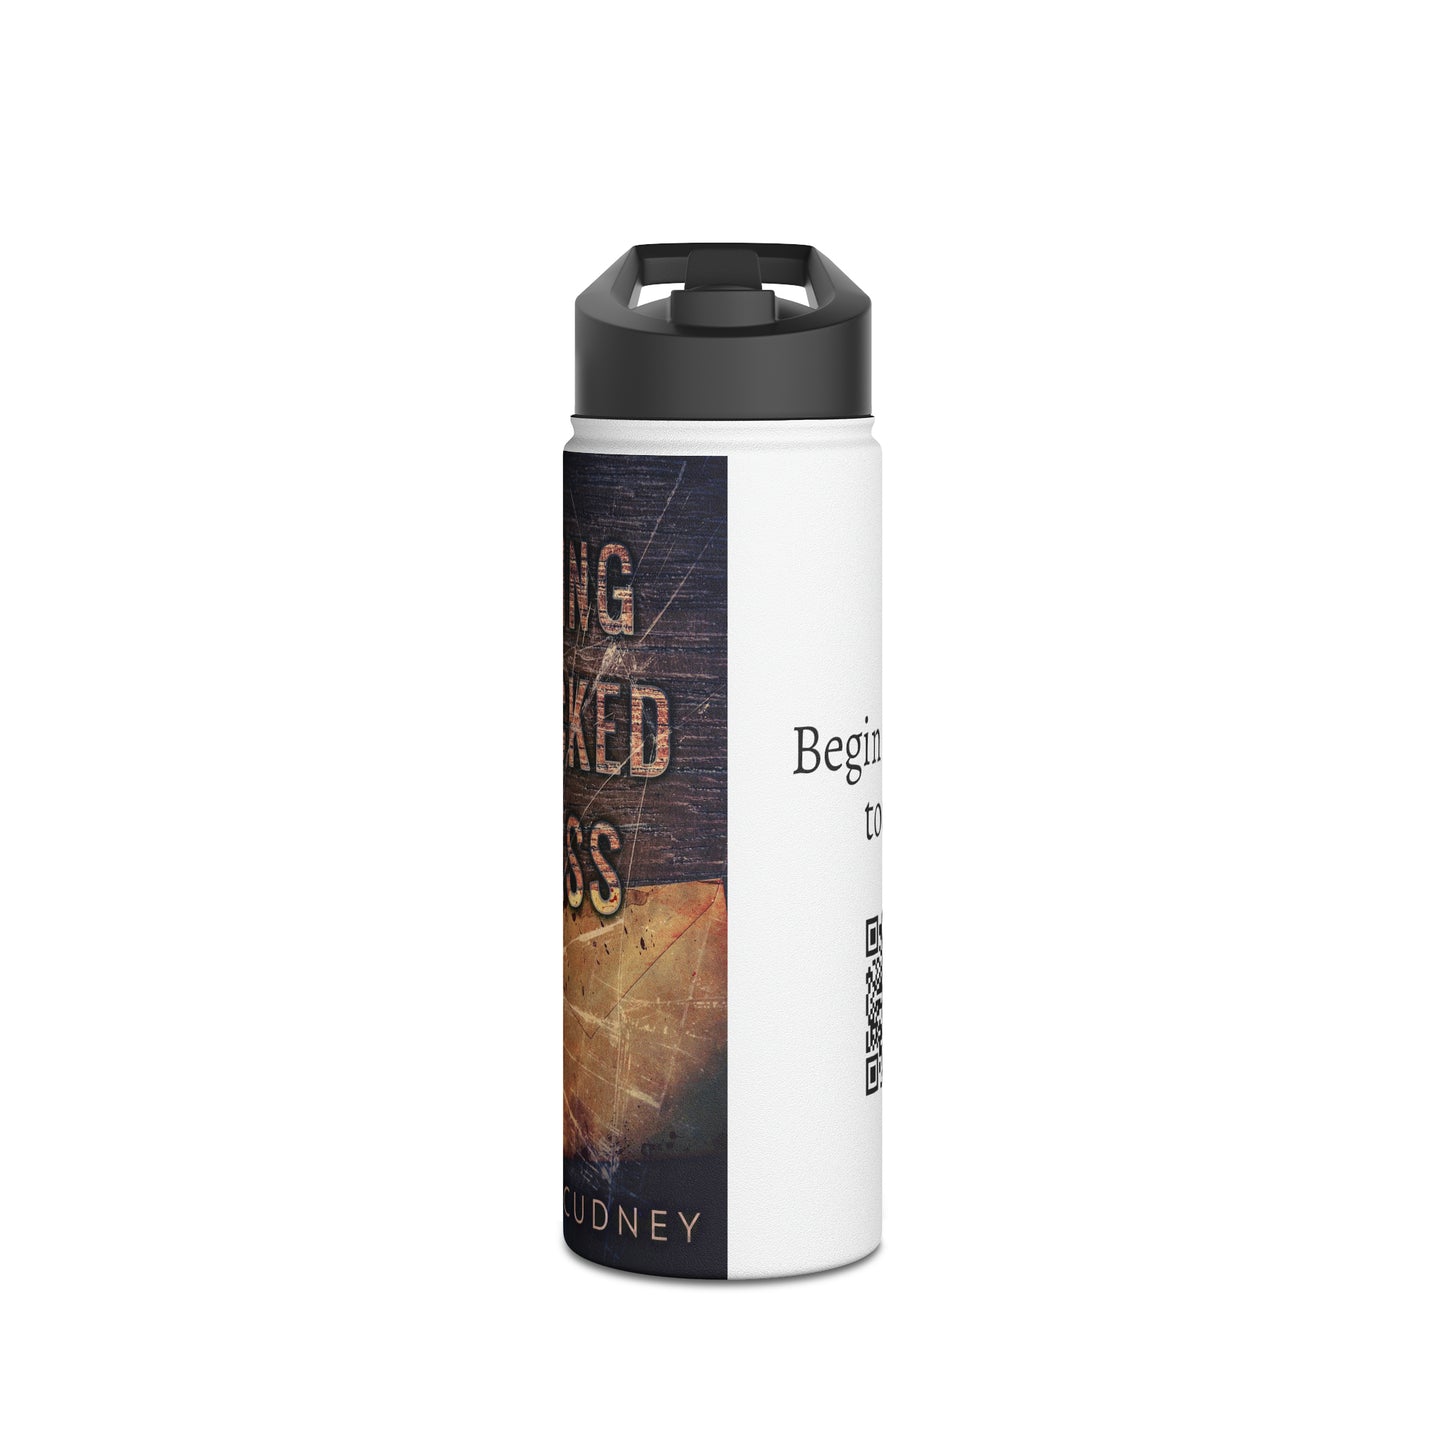 Hiding Cracked Glass - Stainless Steel Water Bottle